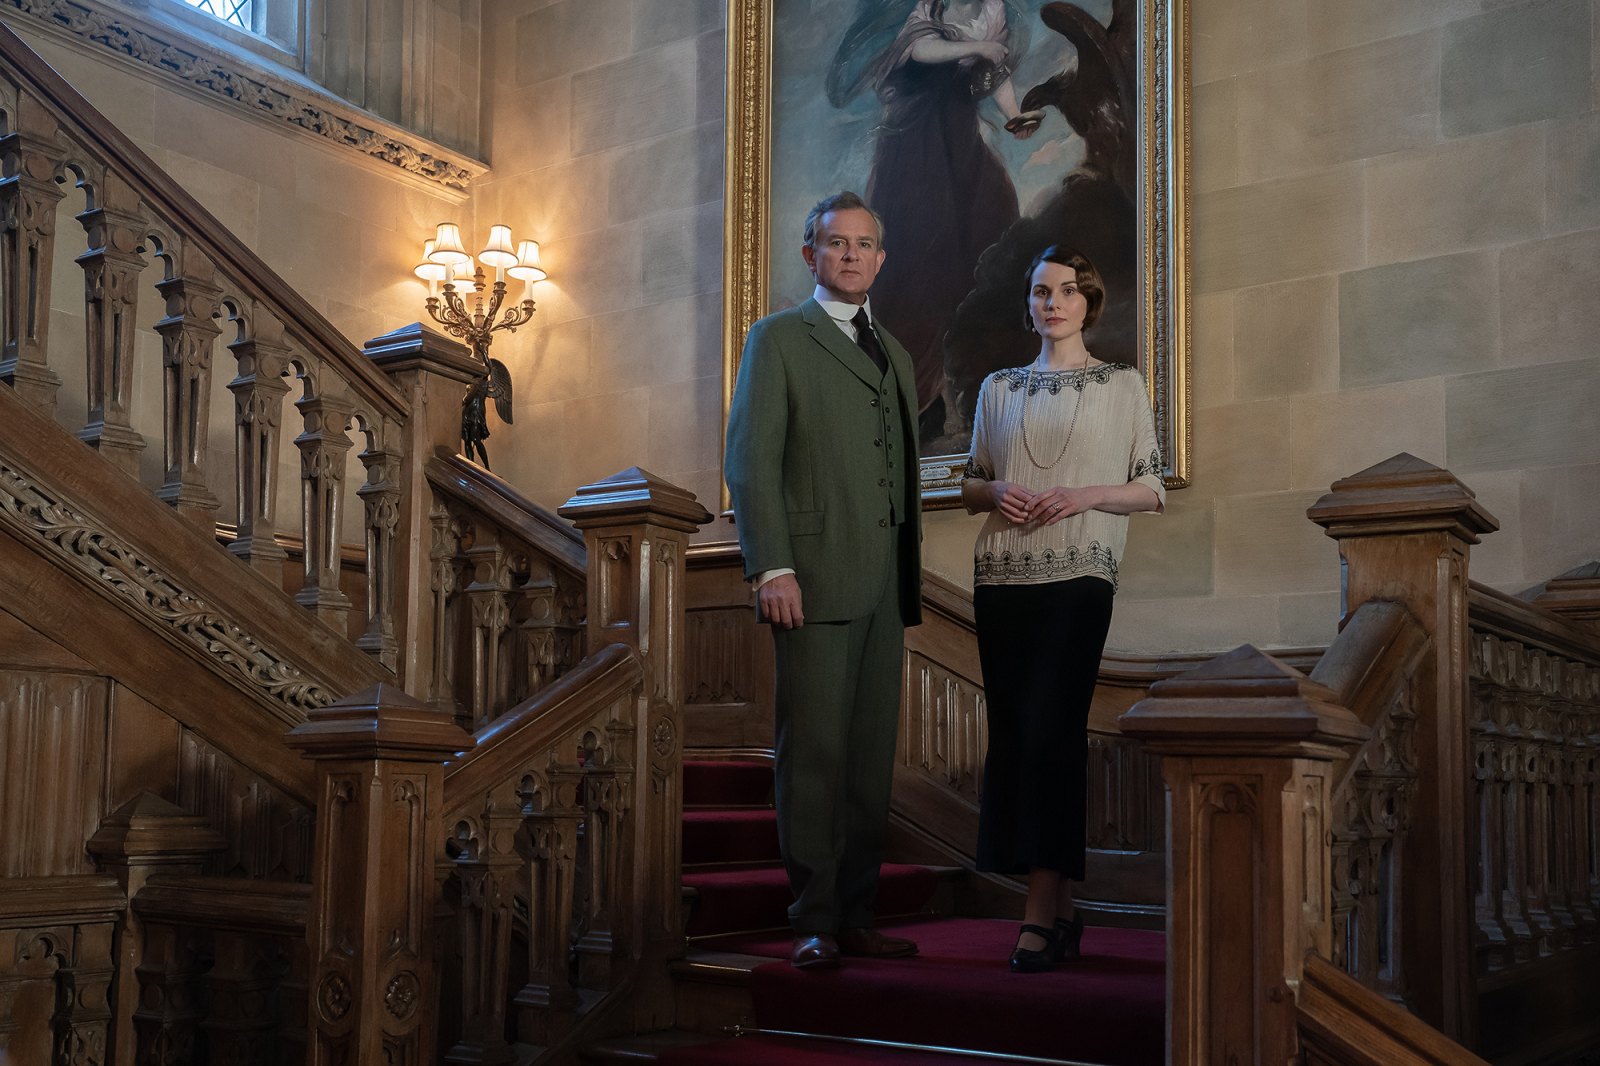 Downton Abbey’ Movie Sequel: Everything We Know About the Cast, Release Date and More